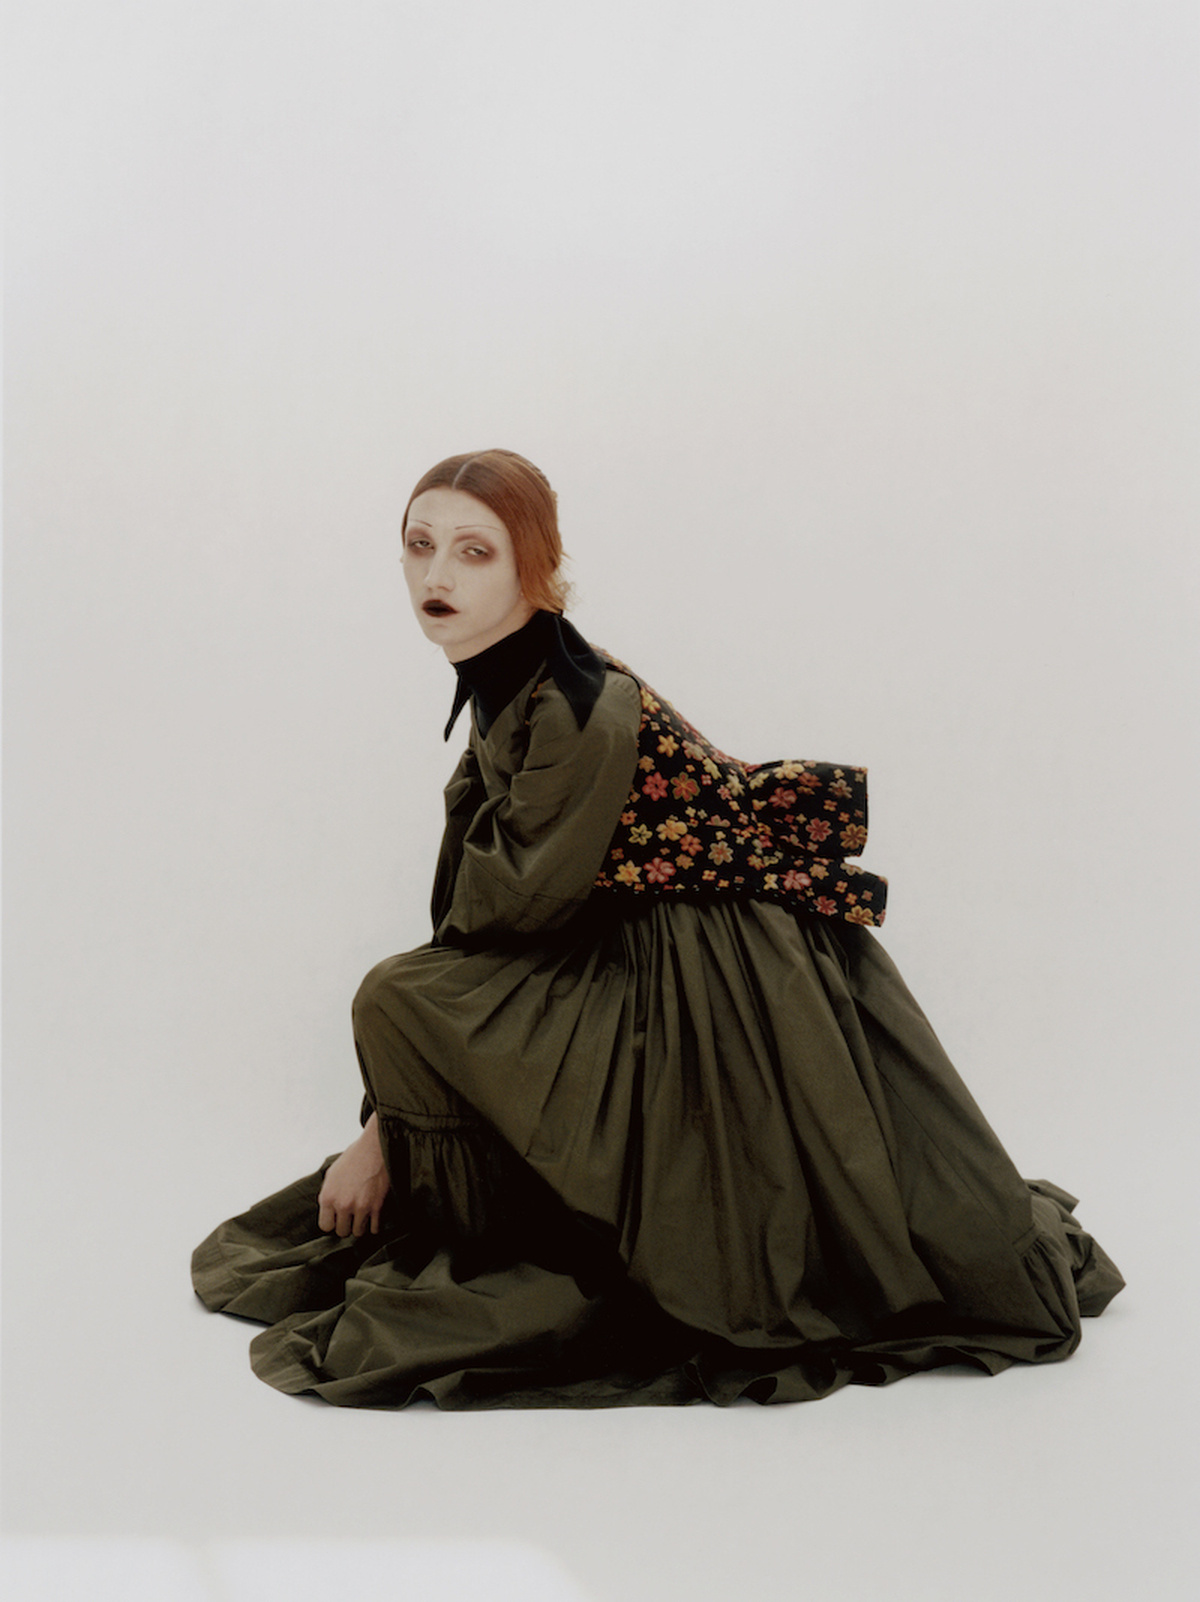 A fashion photo of Sgaire wearing gothic makeup and a long dark dress. She appears to float on a white background.